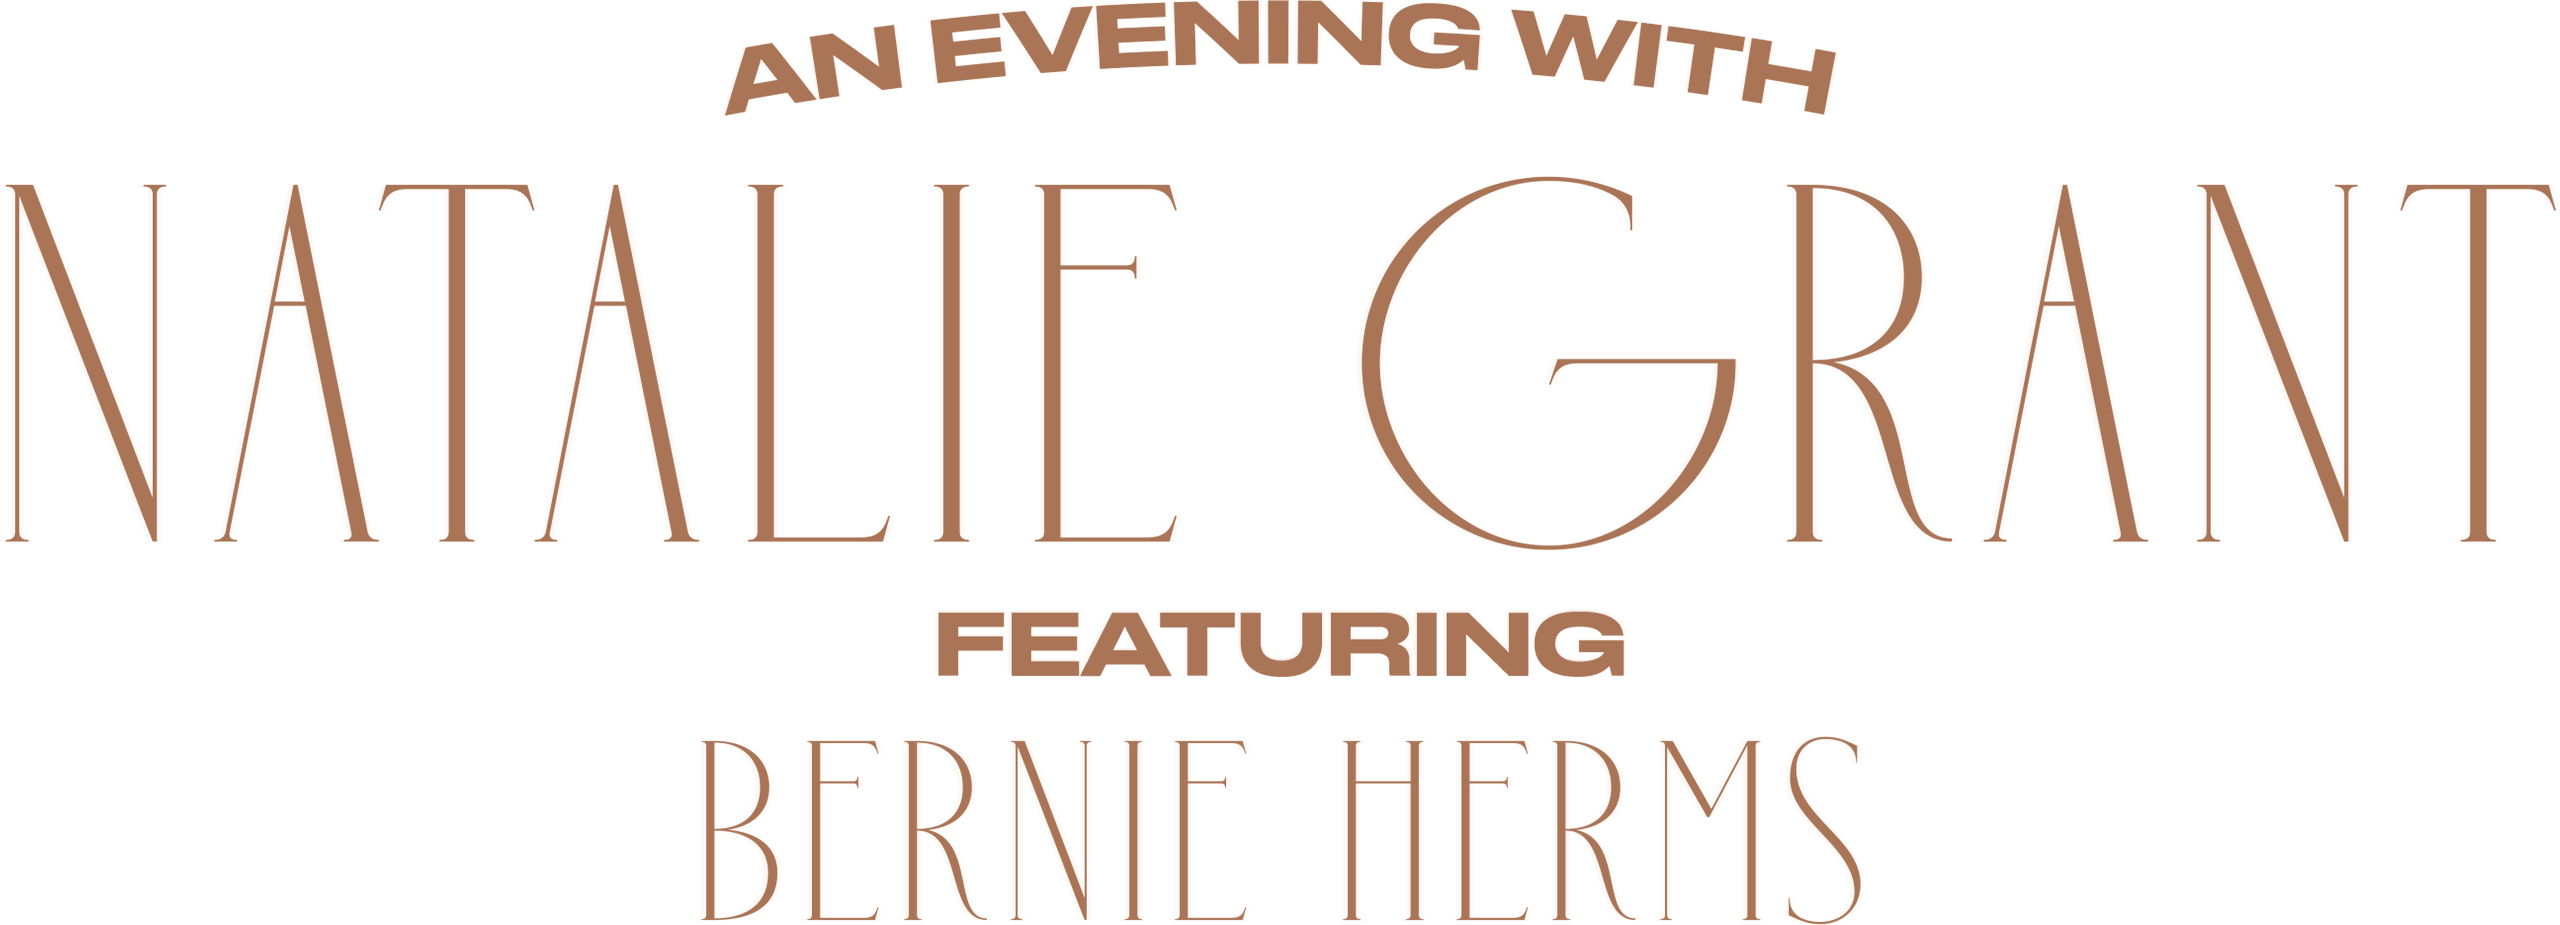 An evening with Natalie Grant featuring Bernie Herms